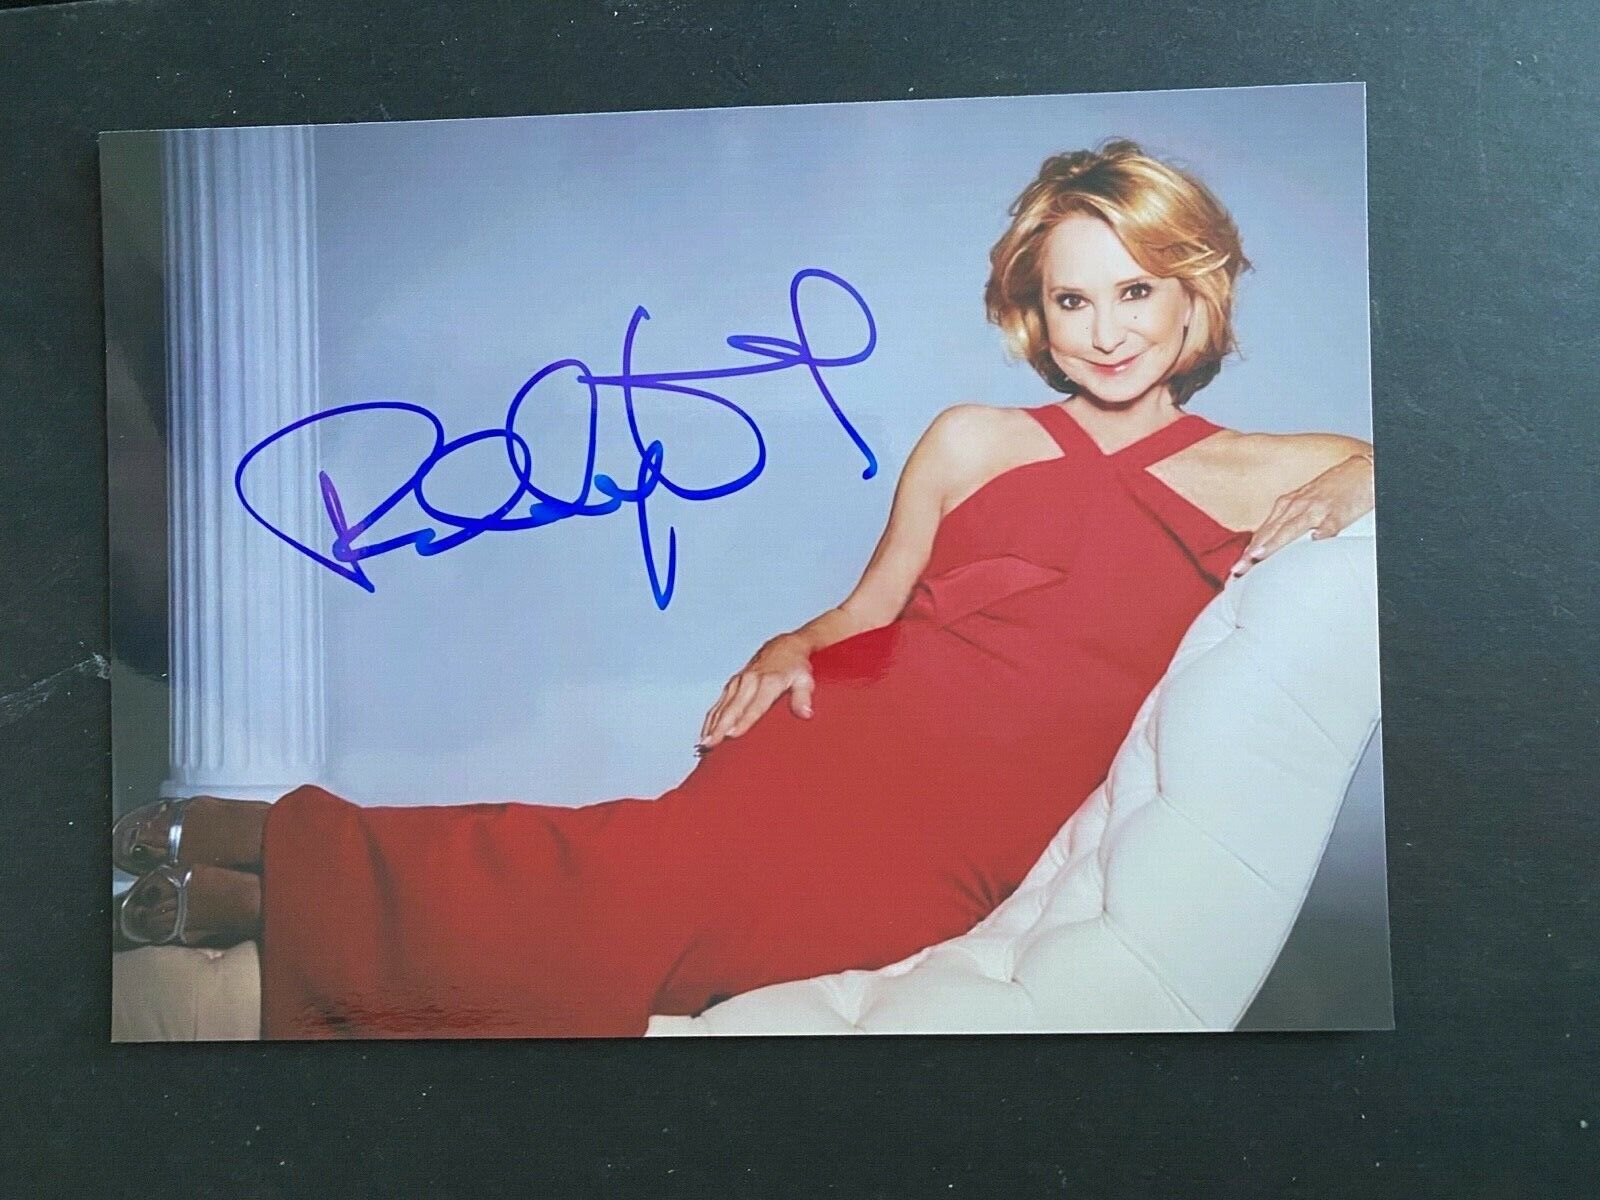 FELICITY KENDALL - POPULAR ACTRESS - THE GOOD LIFE - EXCELLENT SIGNED Photo Poster paintingGRAPH